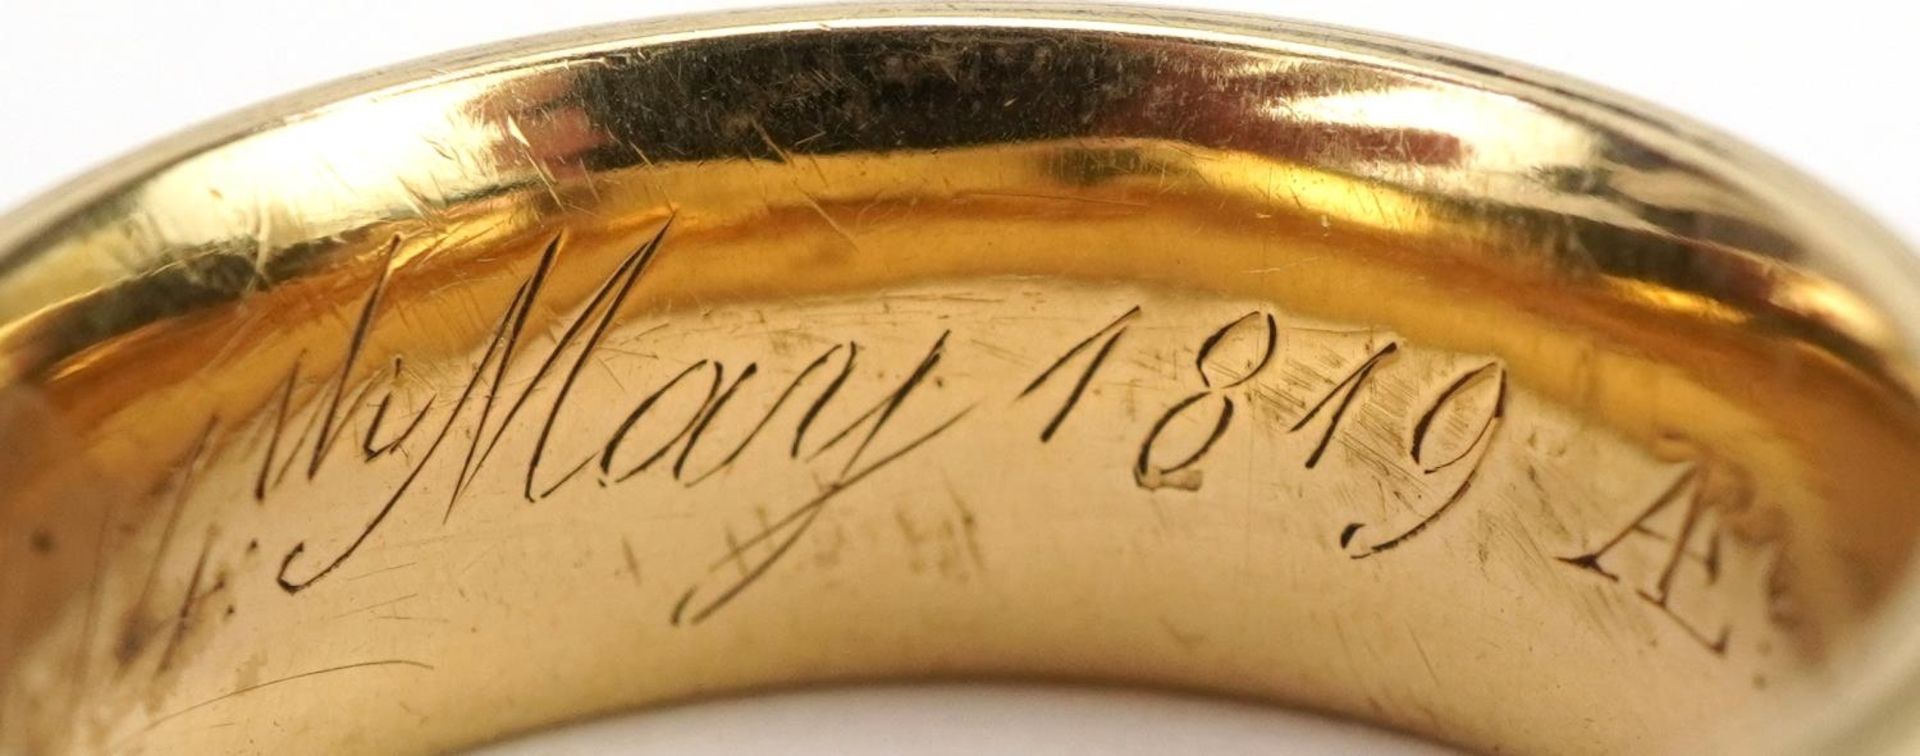 Georgian unmarked gold repousse band mourning ring with hidden locket compartment, tests as 22ct - Image 7 of 8